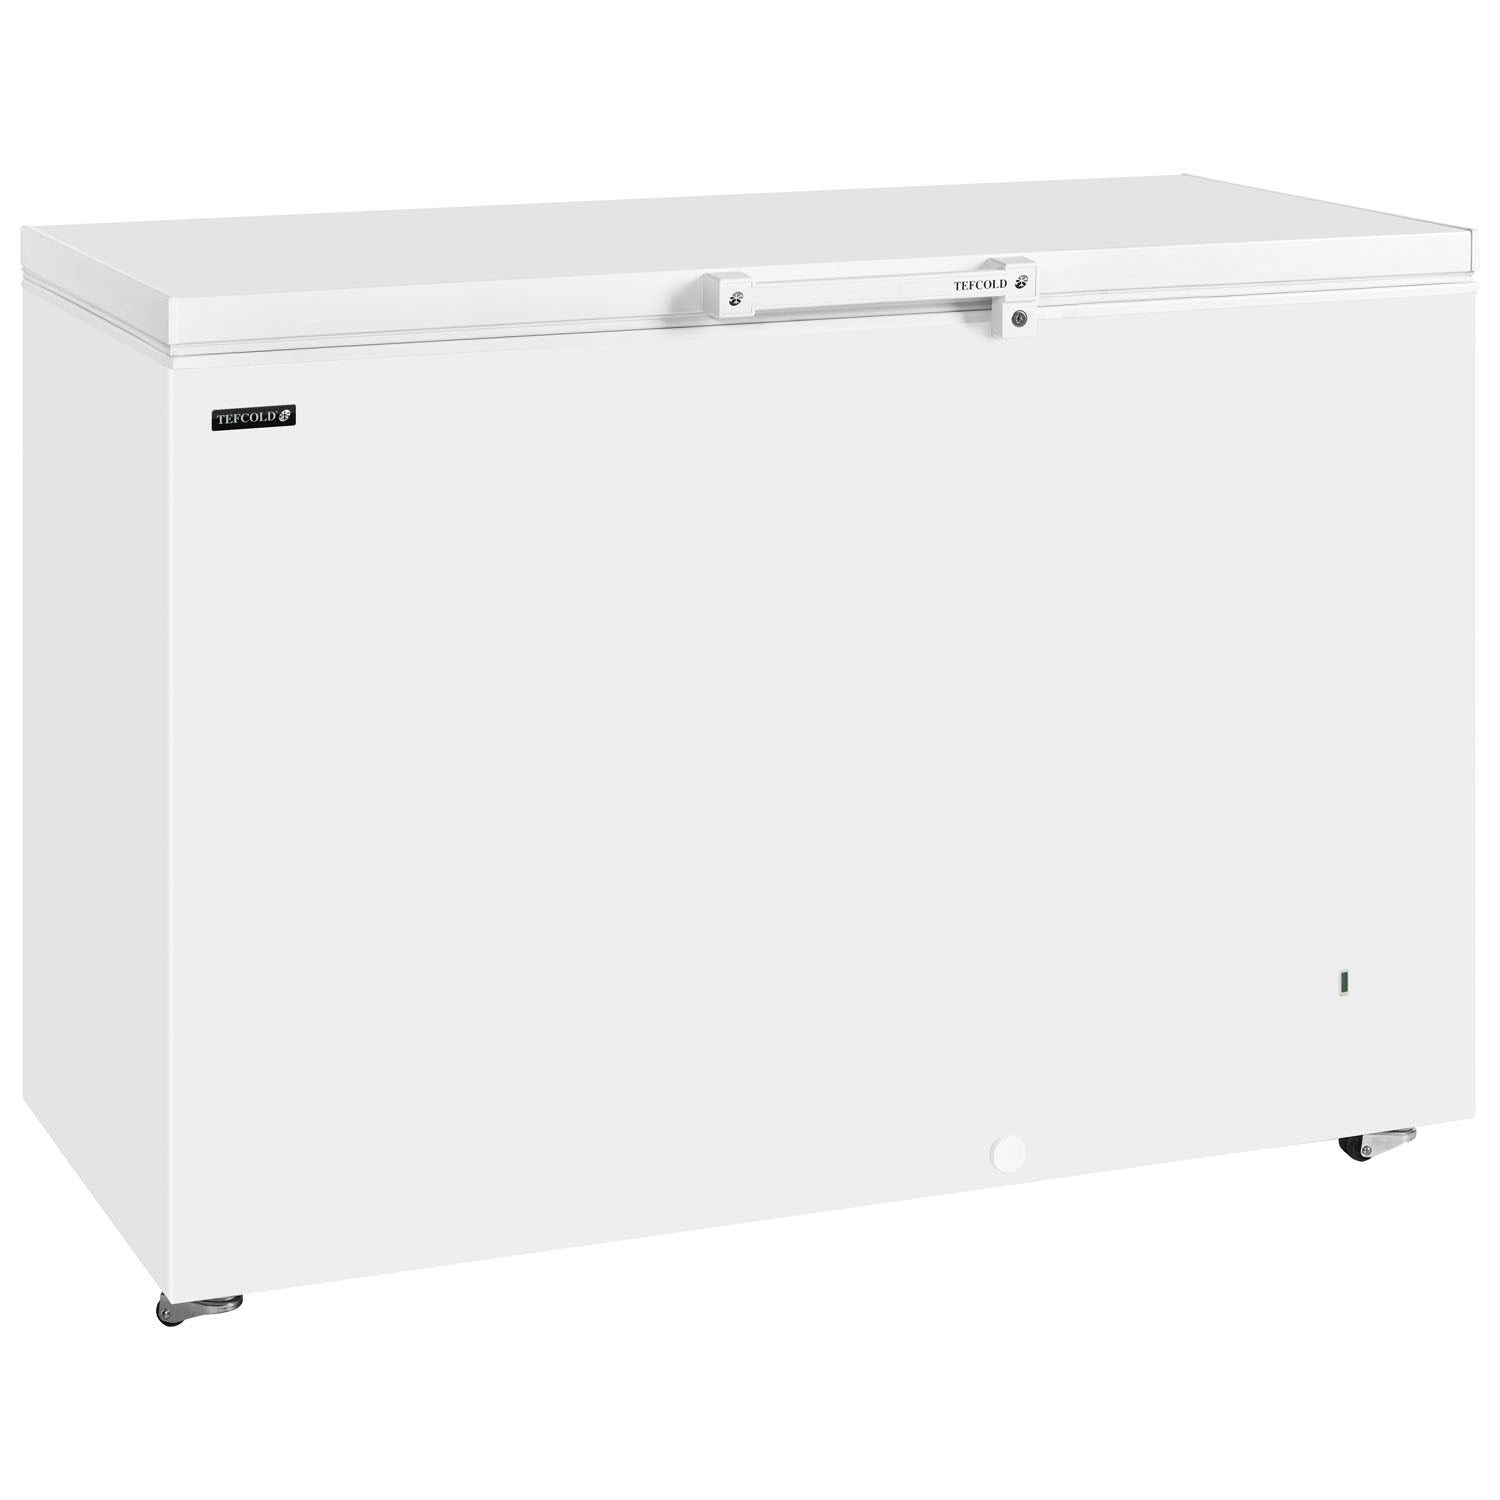 Tefcold GM Range Solid Lid Chest Freezer.Product Ref:00481.MODEL:GM300..🚚 4-6 Days Delivery